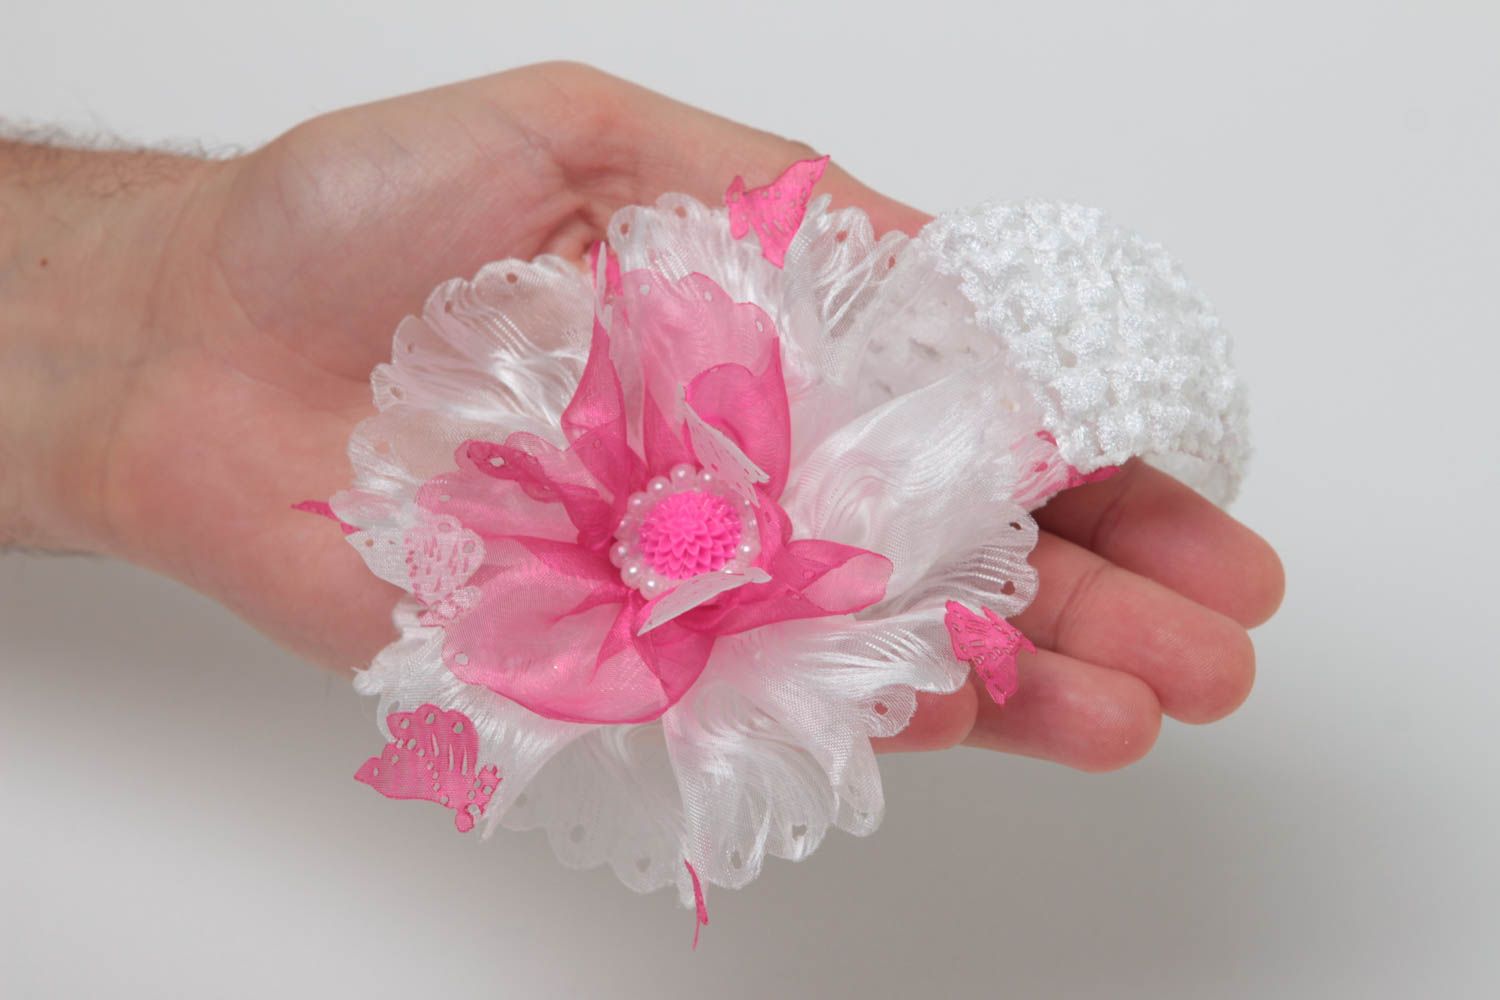 Gentle handmade textile flower headband flowers in hair gifts for her photo 5